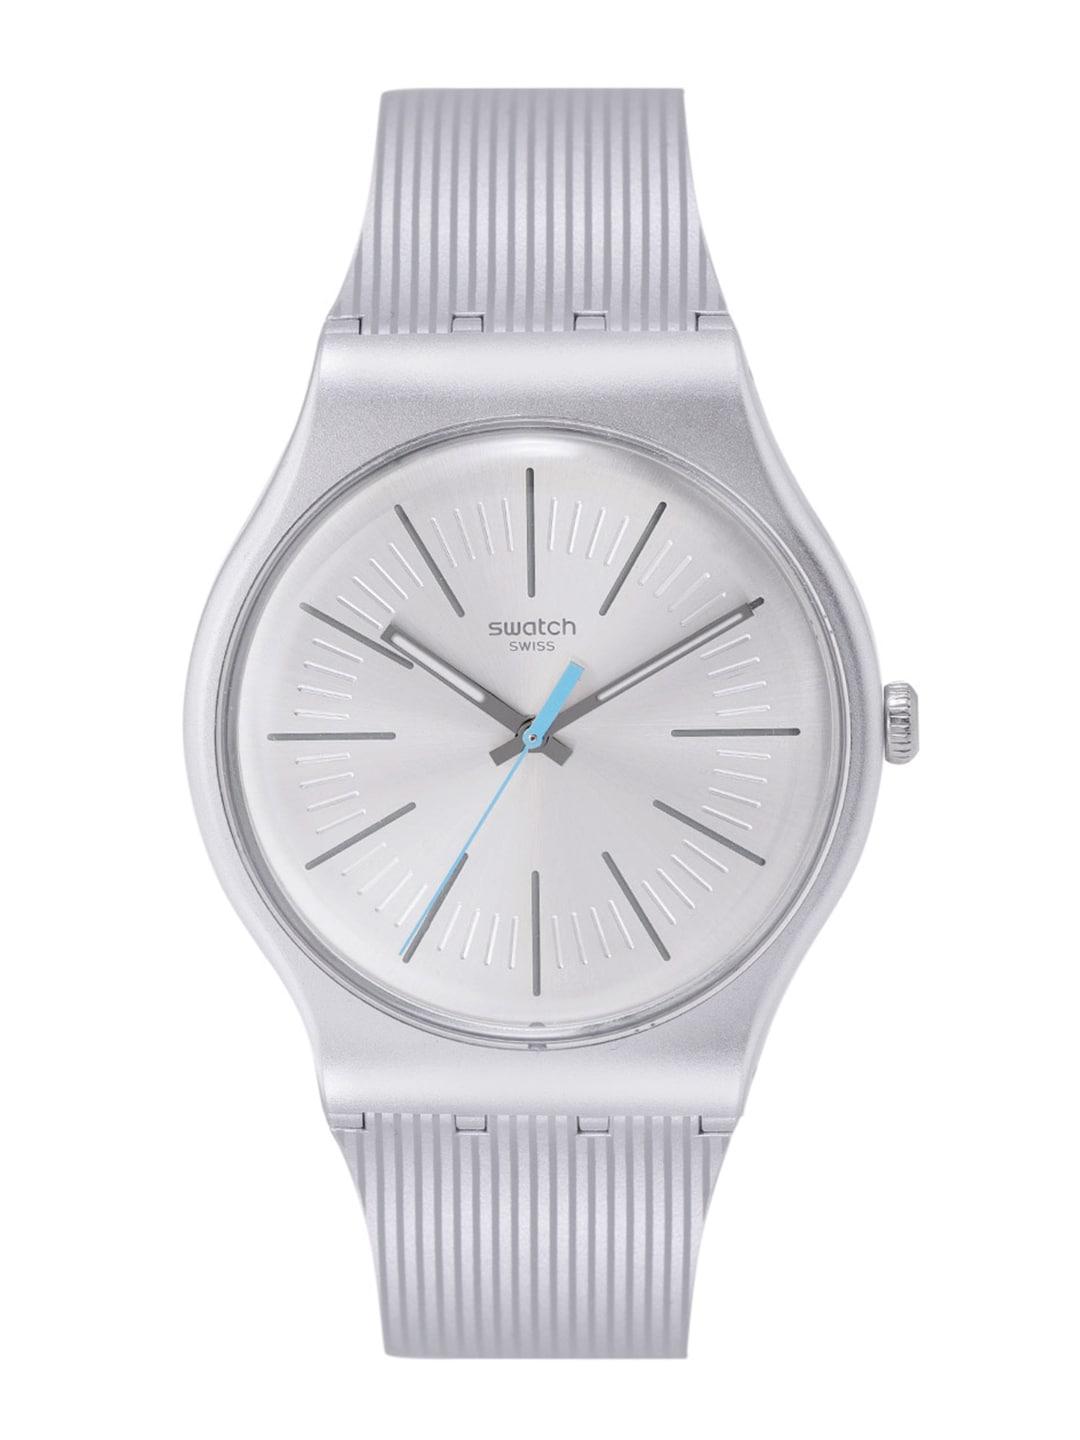 Swatch Unisex Silver-Toned Swiss Made Water Resistant Analogue Watch SUOM114